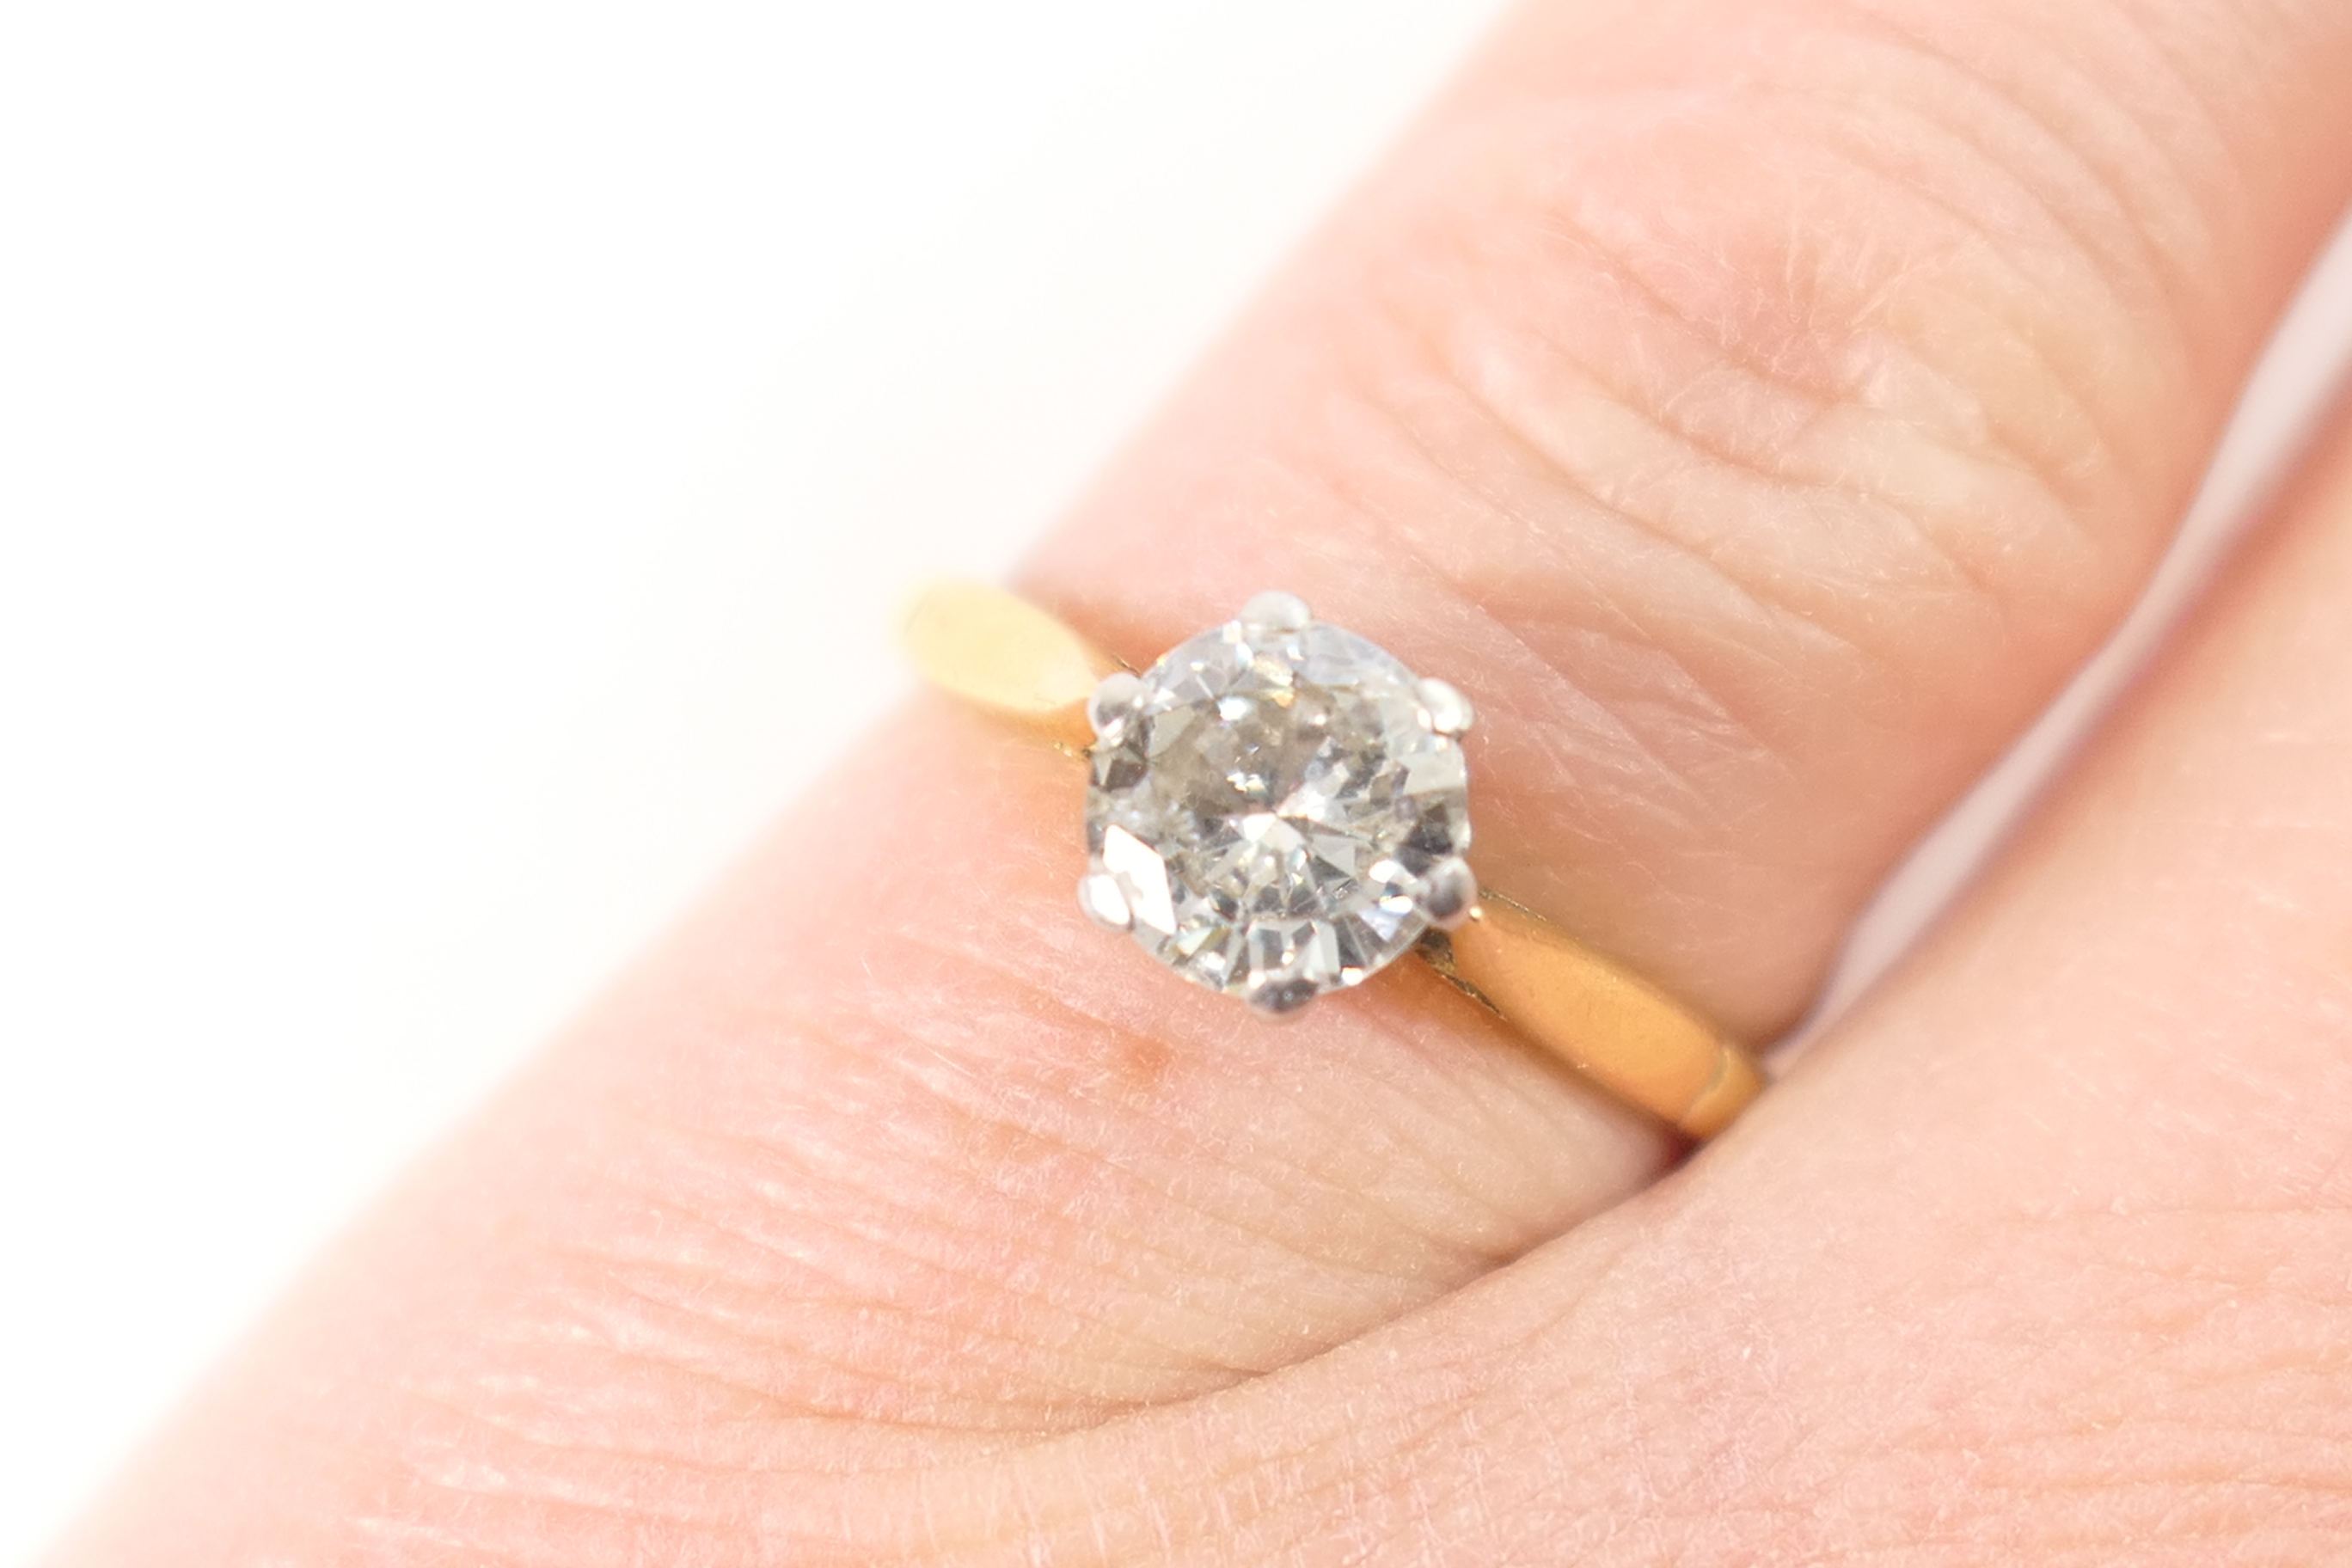 Diamond solitaire ring, round brilliant cut stone of approx. 0.80ct, estimated as H/J in colour